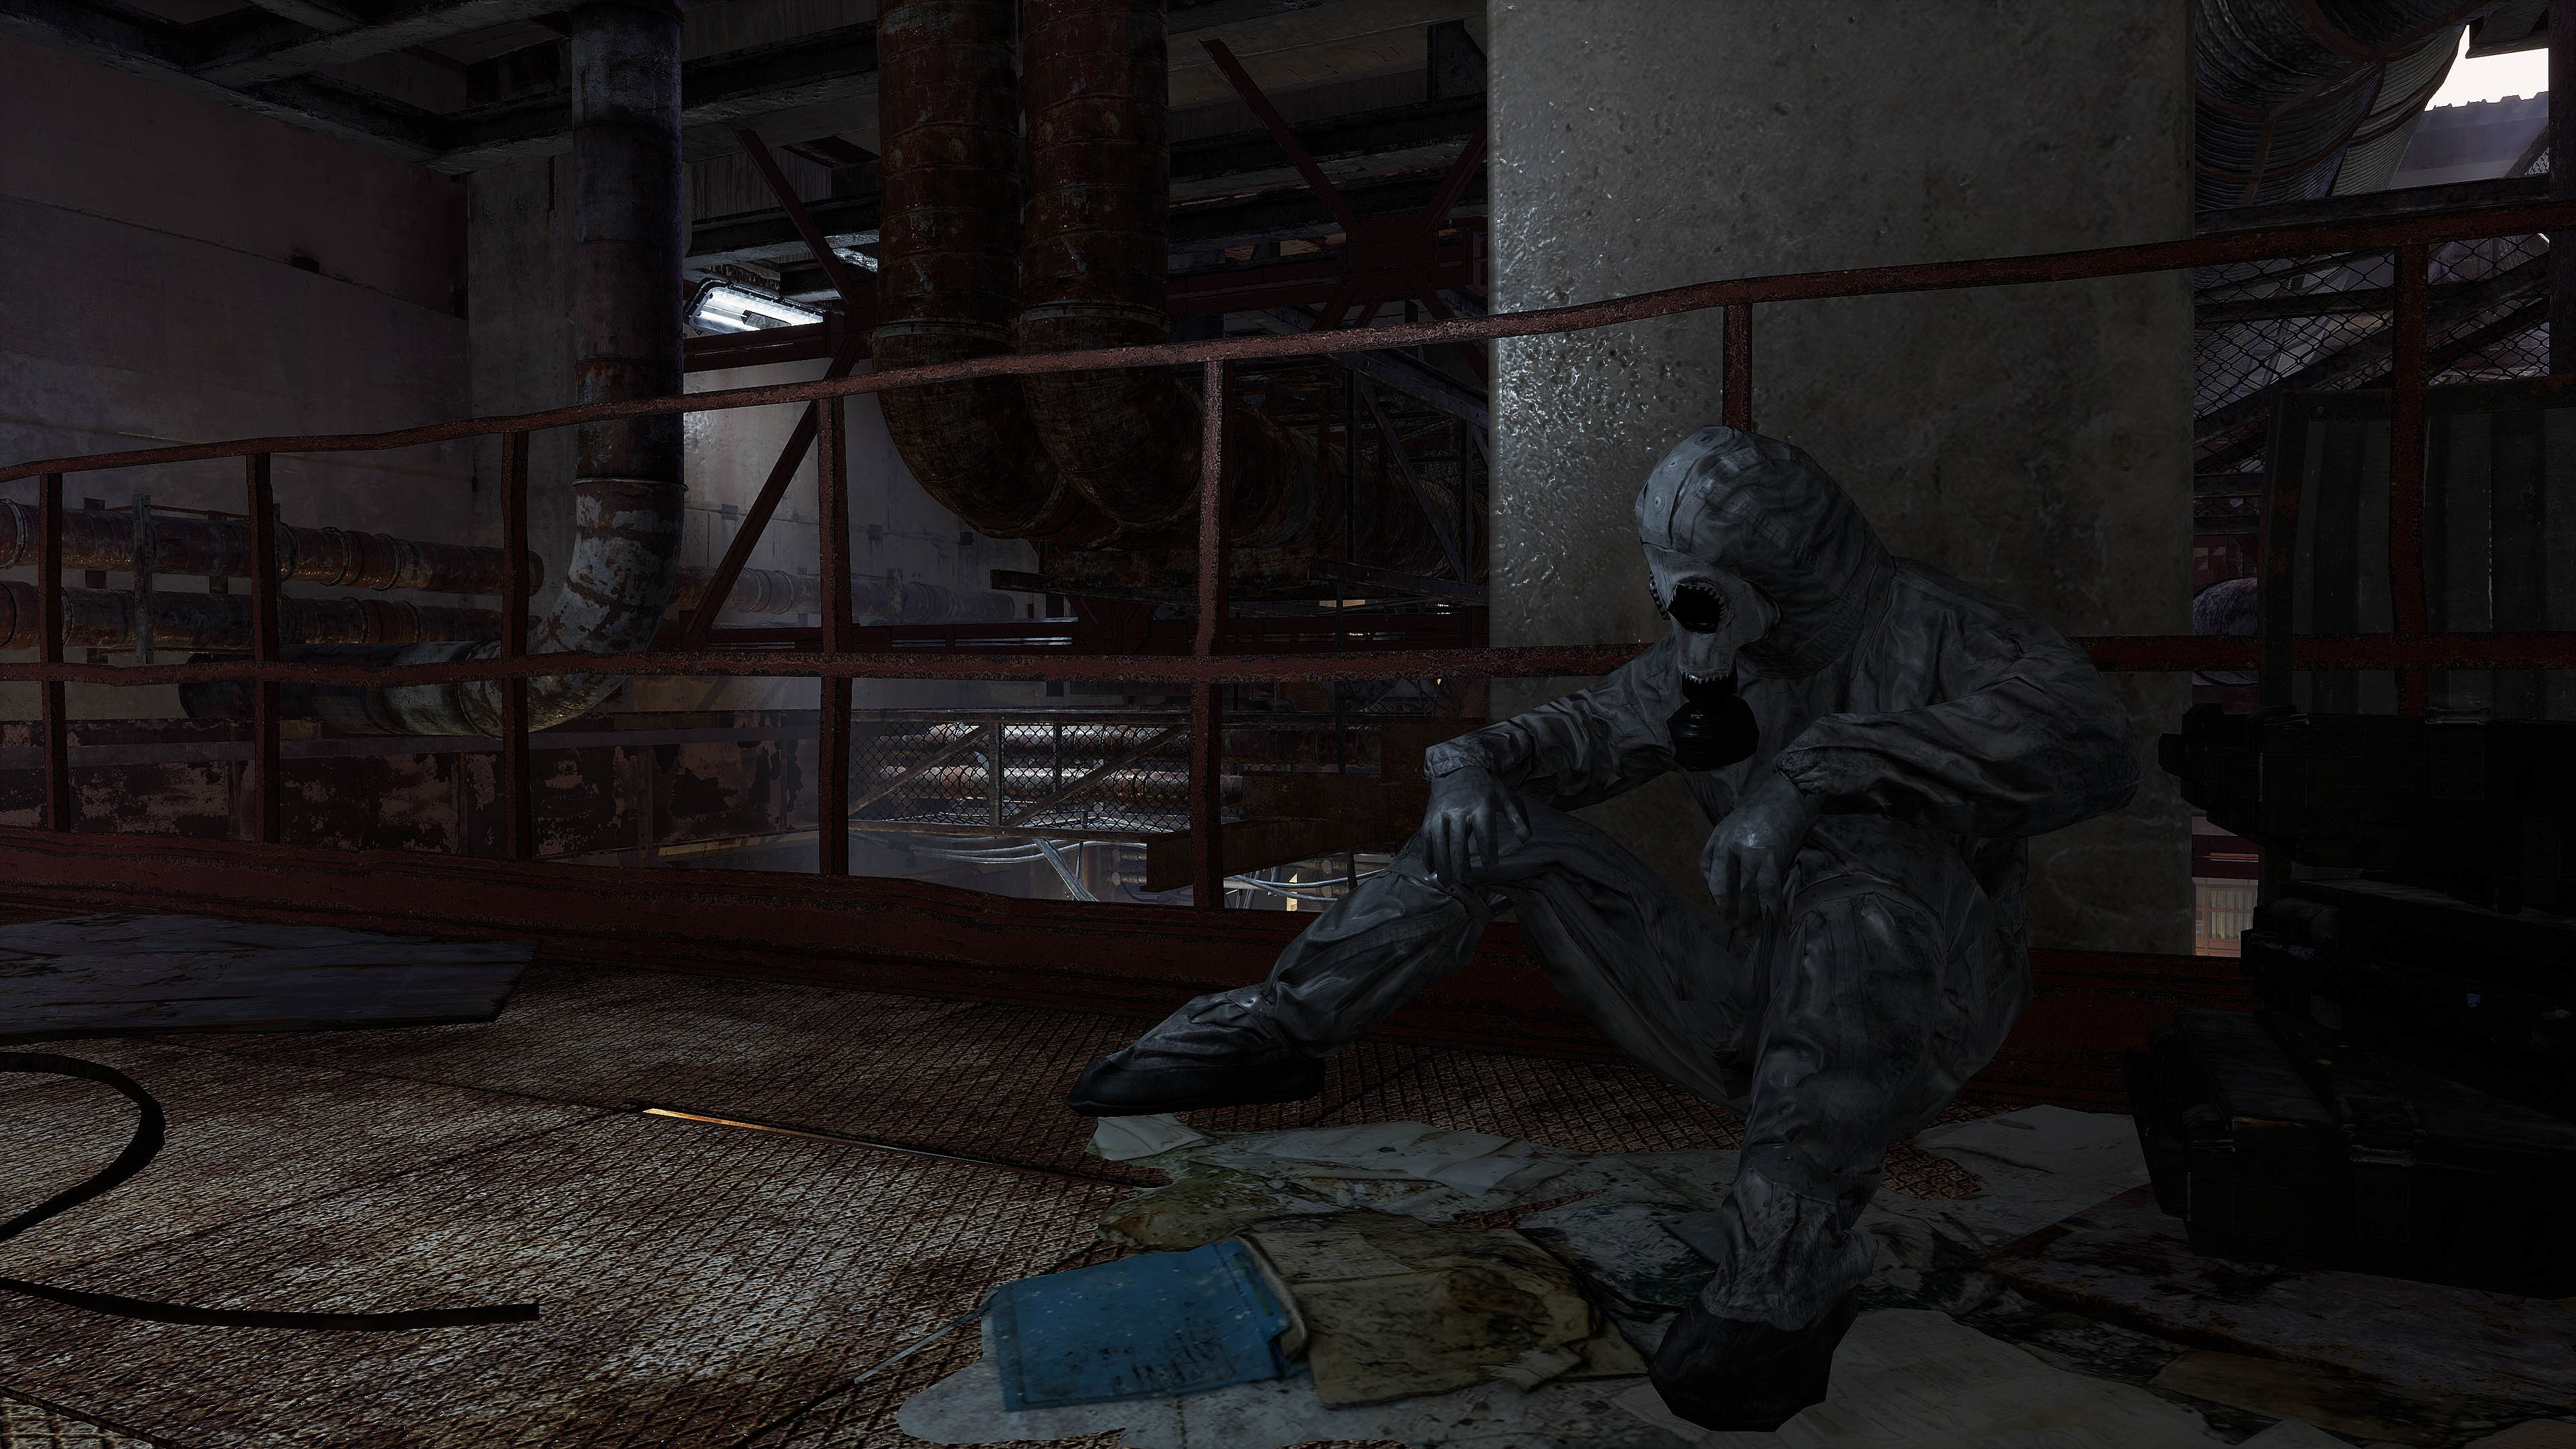 STALKER 2: Heart of Chernobyl receives its first gameplay trailer